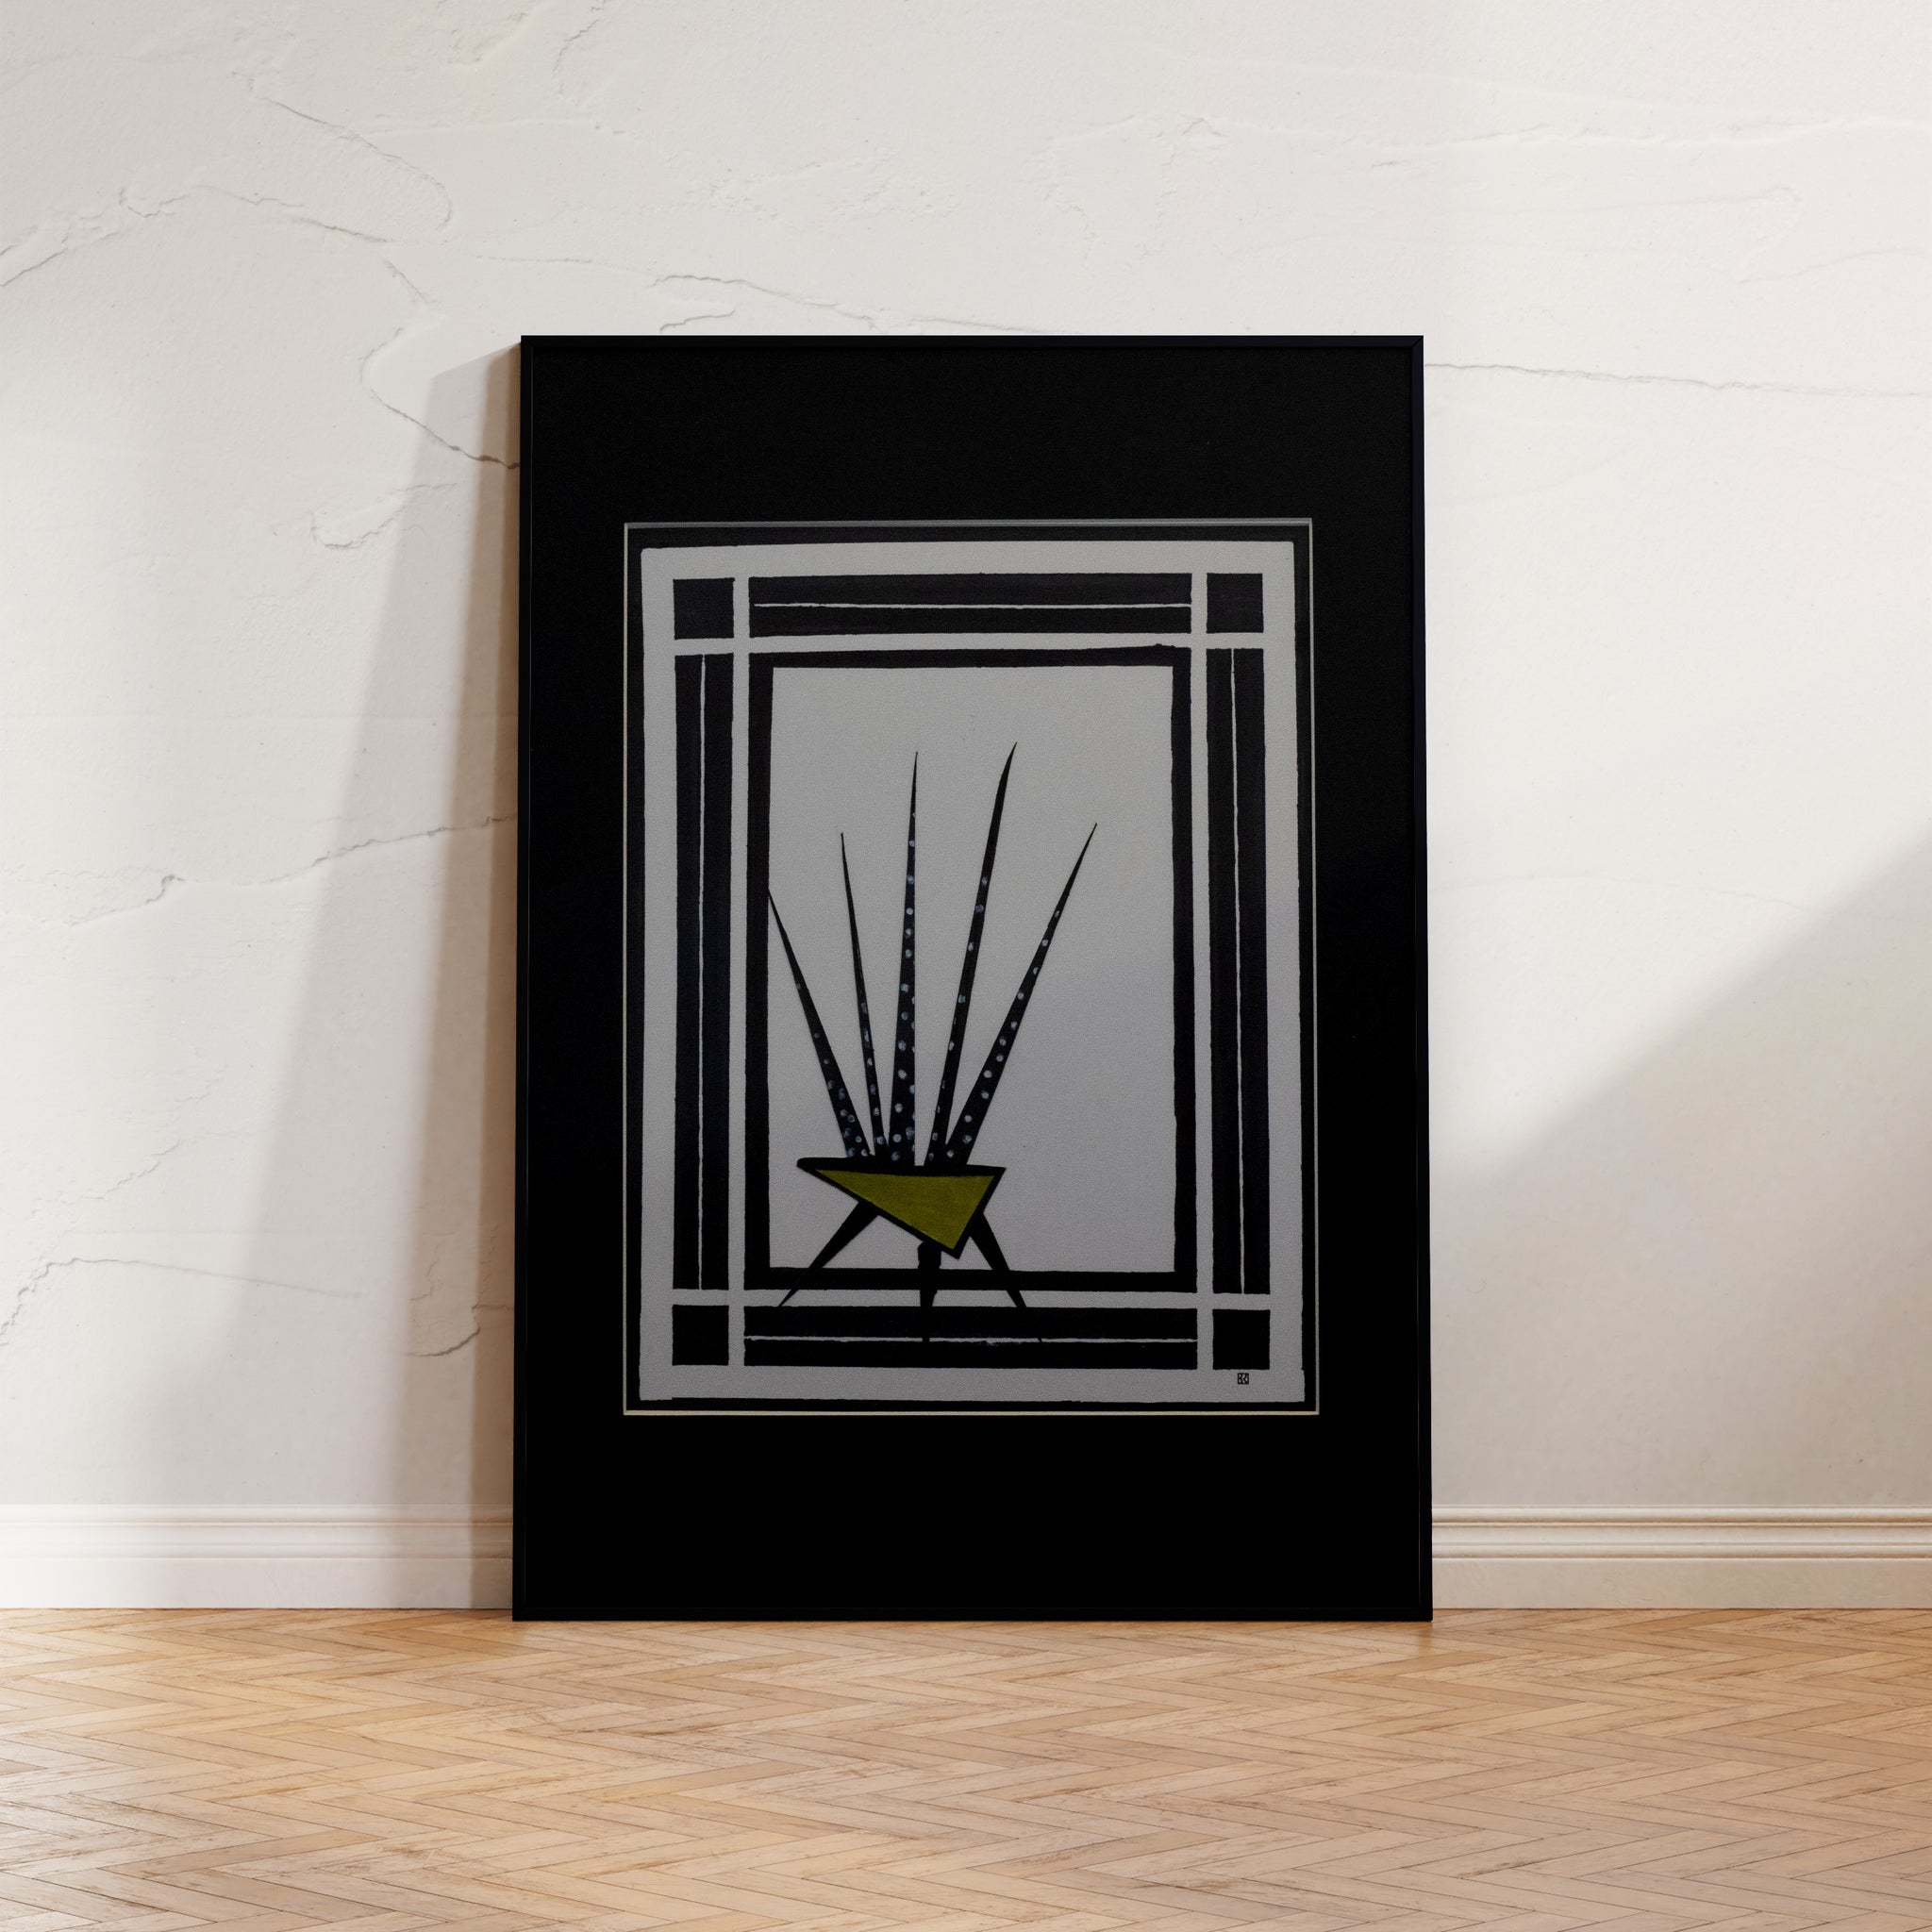 "Through The Window", A sophisticated blend of art deco and surrealism capturing the essence of a prickly pear cactus in dark silver and light green.